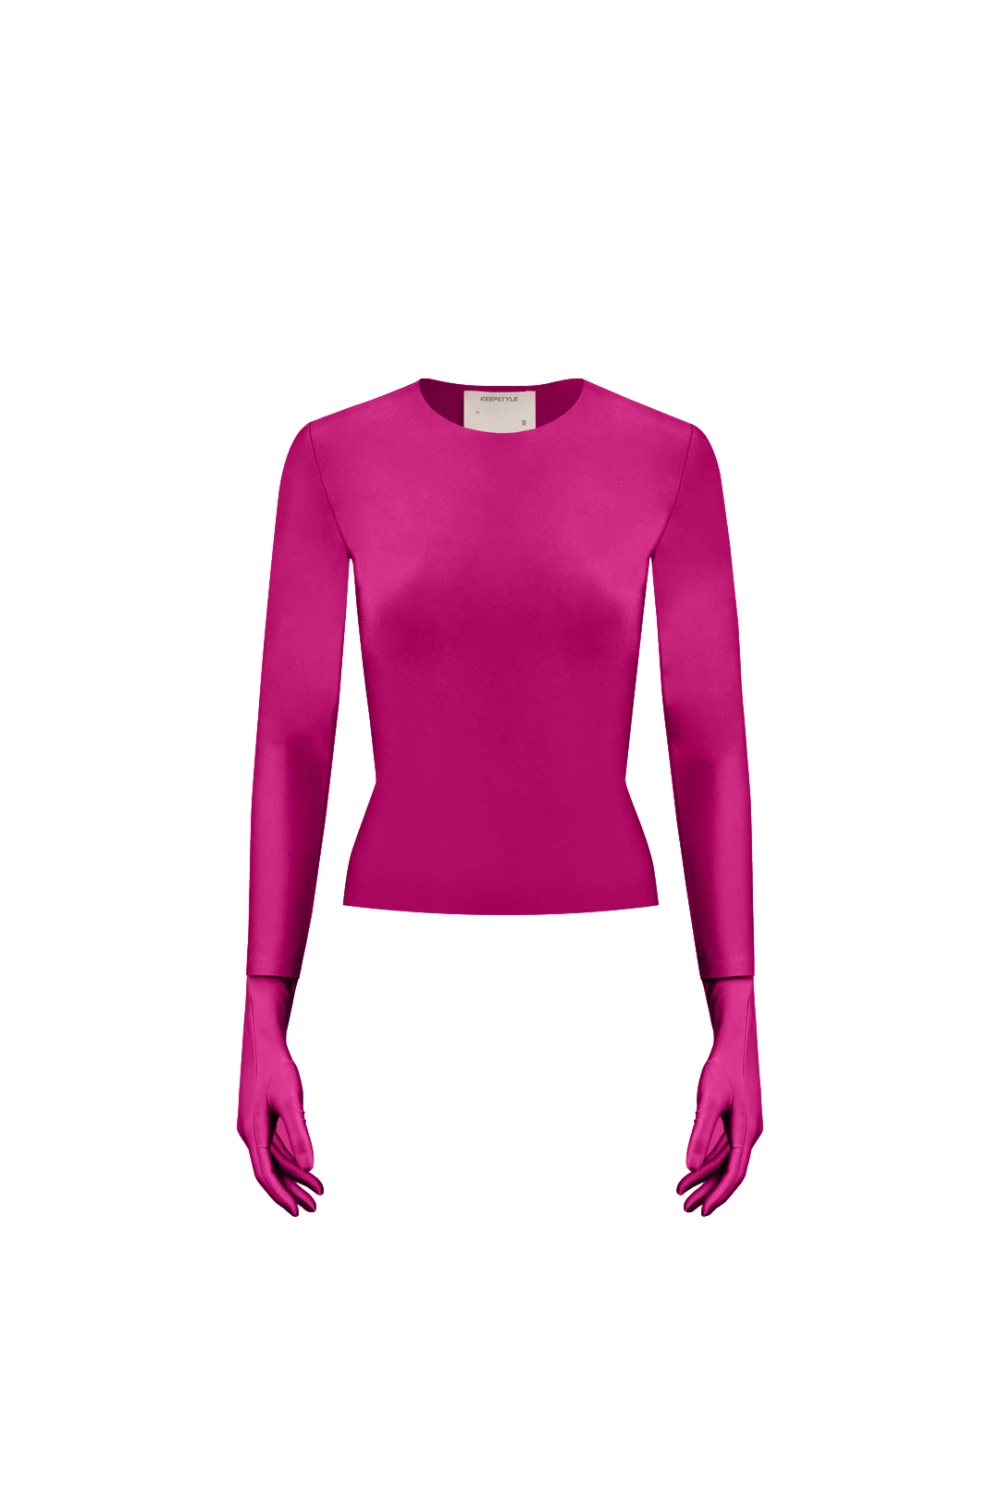 long sleeve lilith in fuchsia color